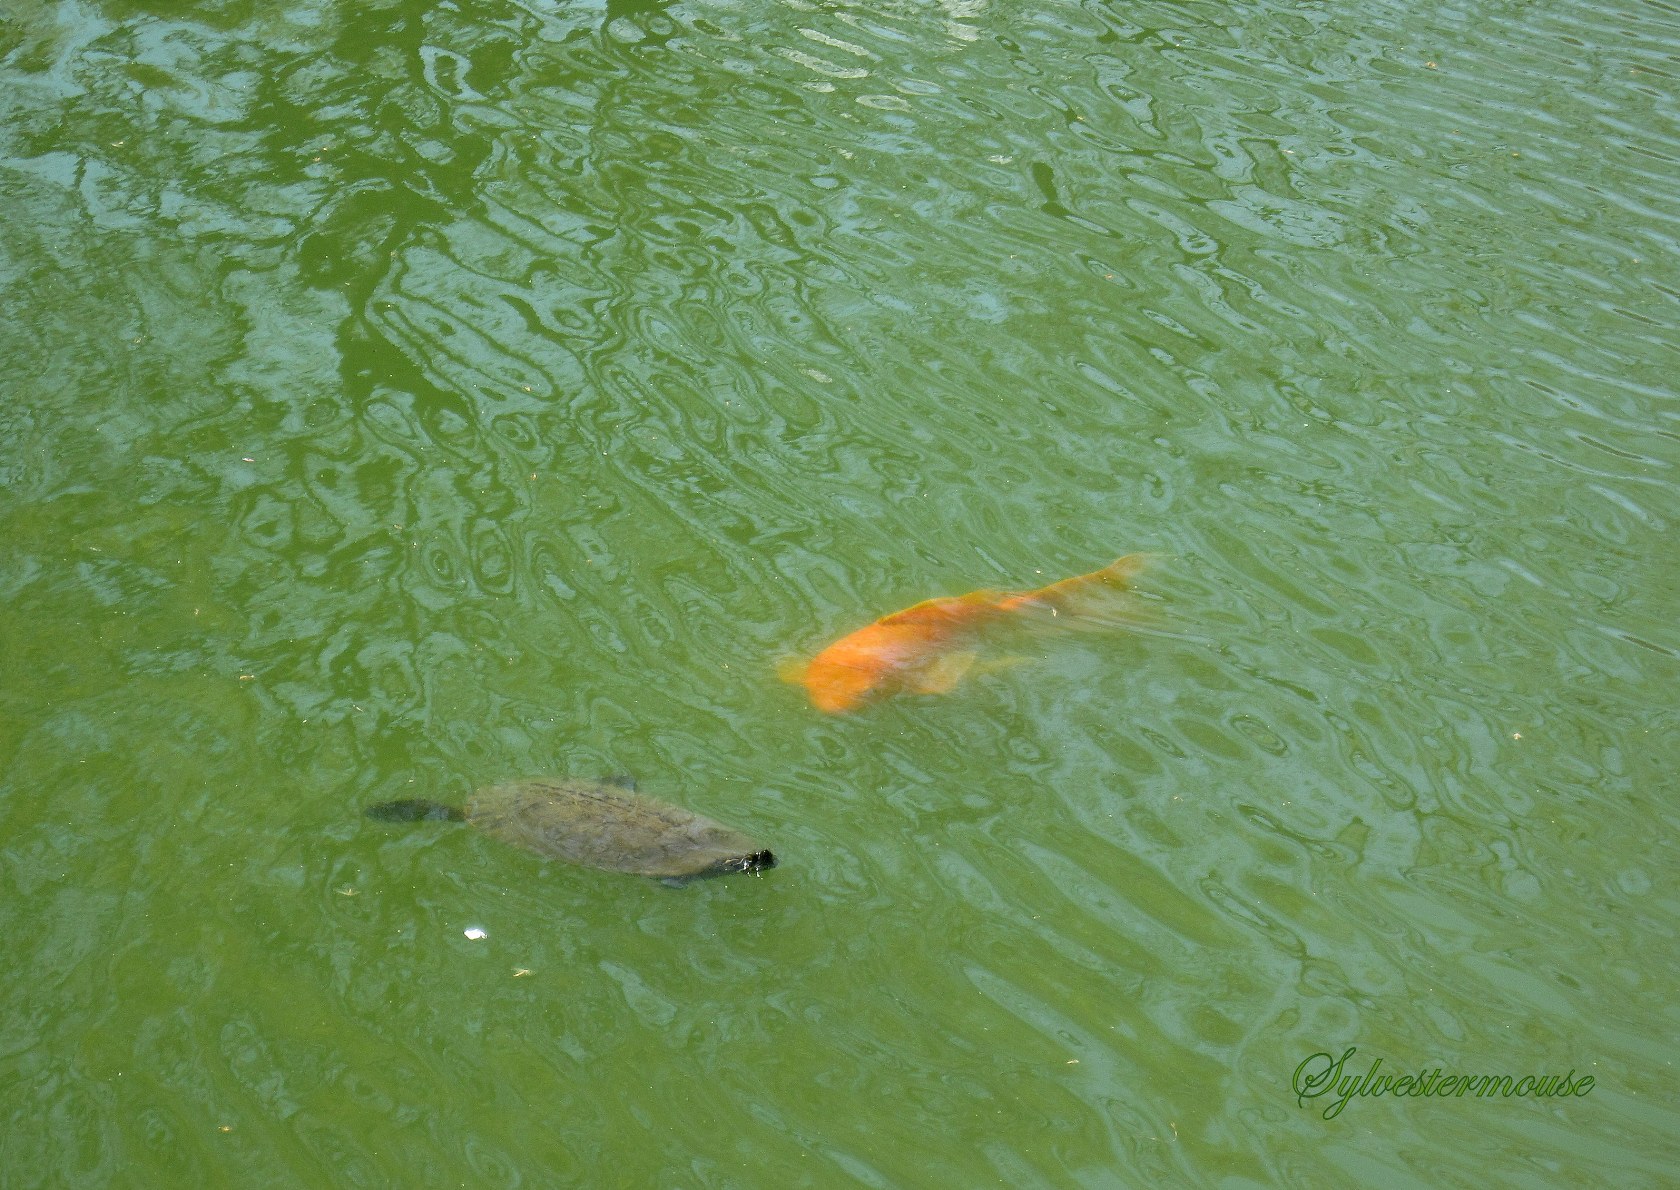 Beneath the Surface photo of Turtle & Koi photo by Sylvestermouse